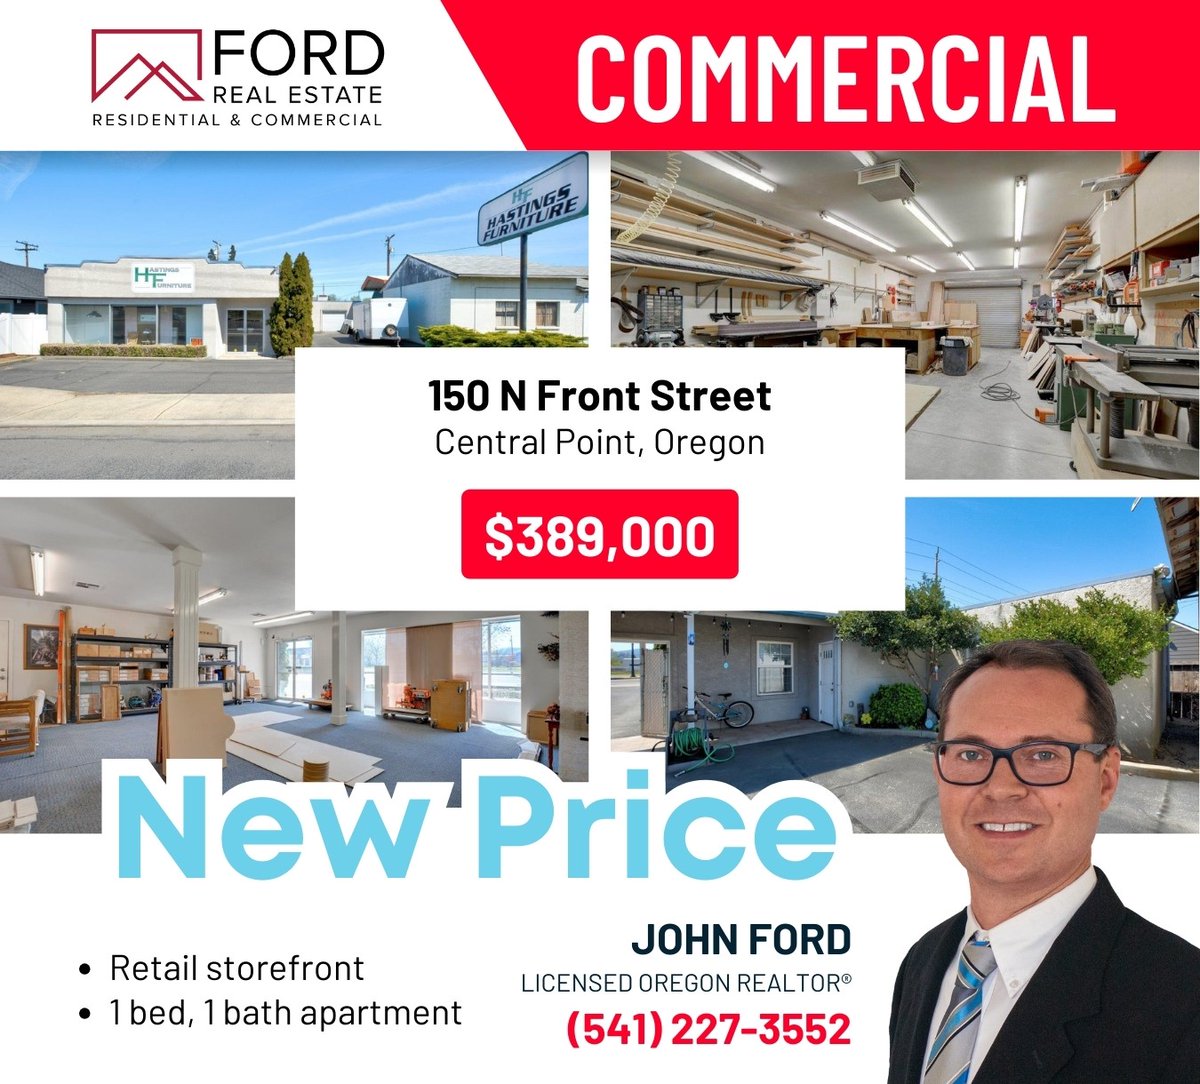 New price for 150 N Front Street, Central Point, OR commercial property! ⭐✨ See the listing here: zurl.co/pRi8 #Commercial #RealEstate